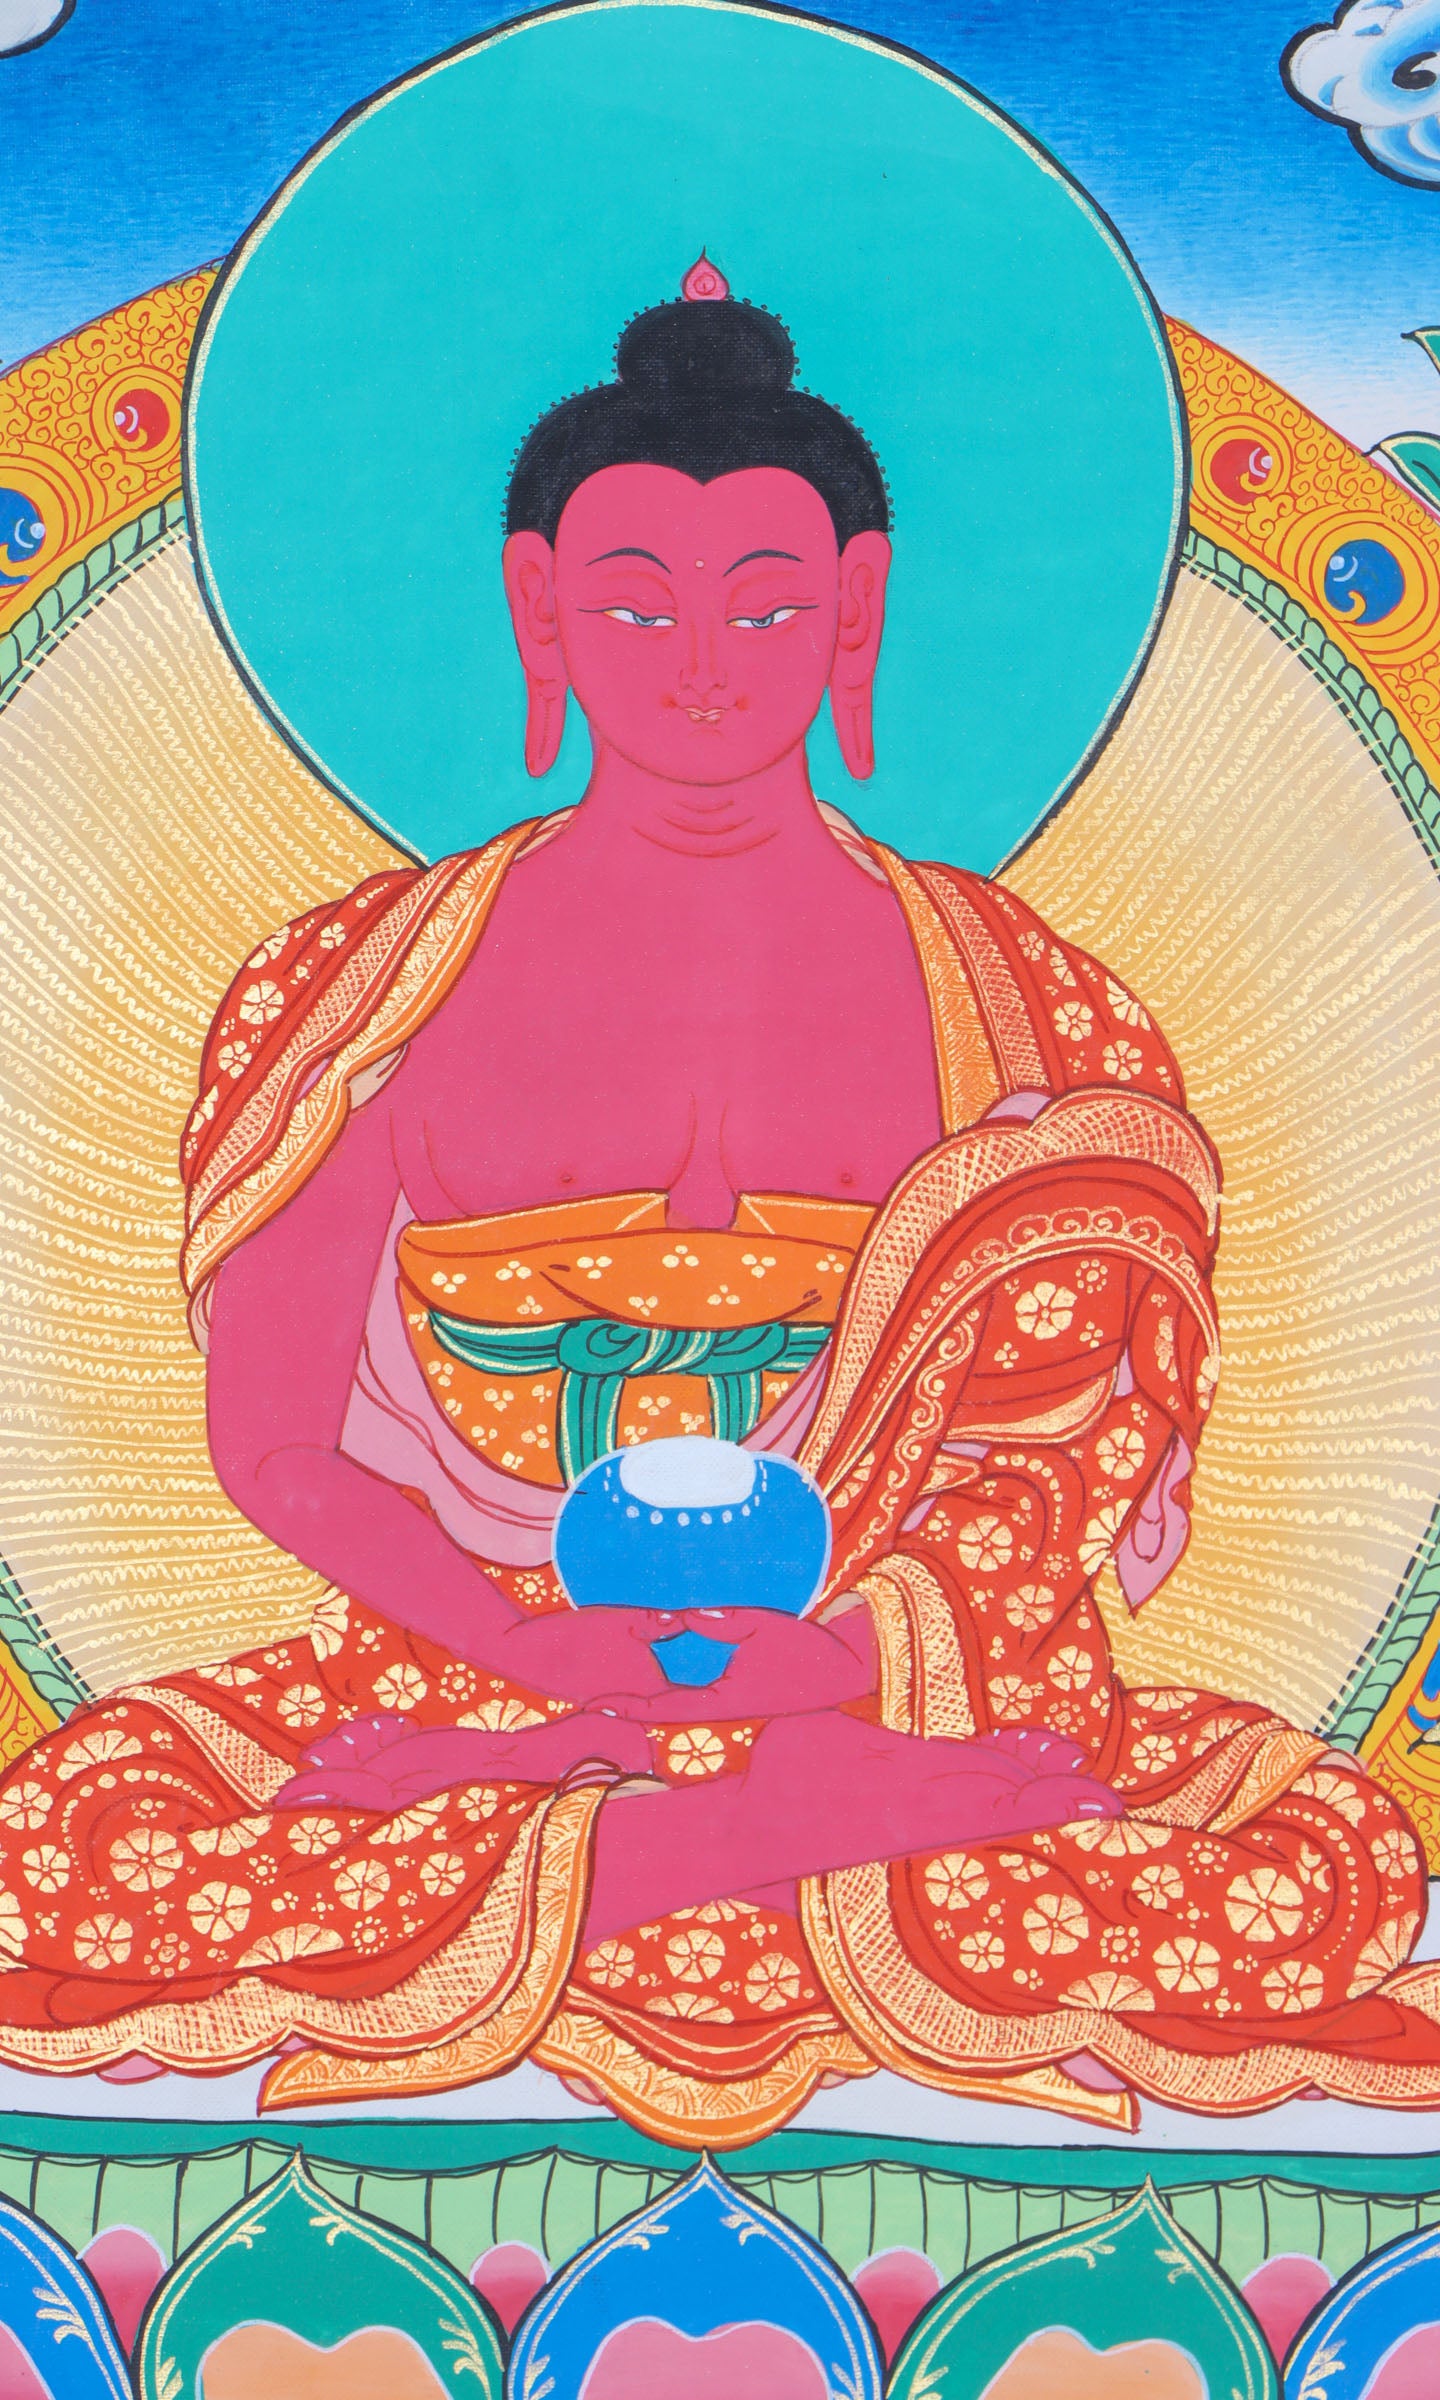 Amitabha Thangka holds deep spiritual significance within the context of Buddhist philosophy and practice